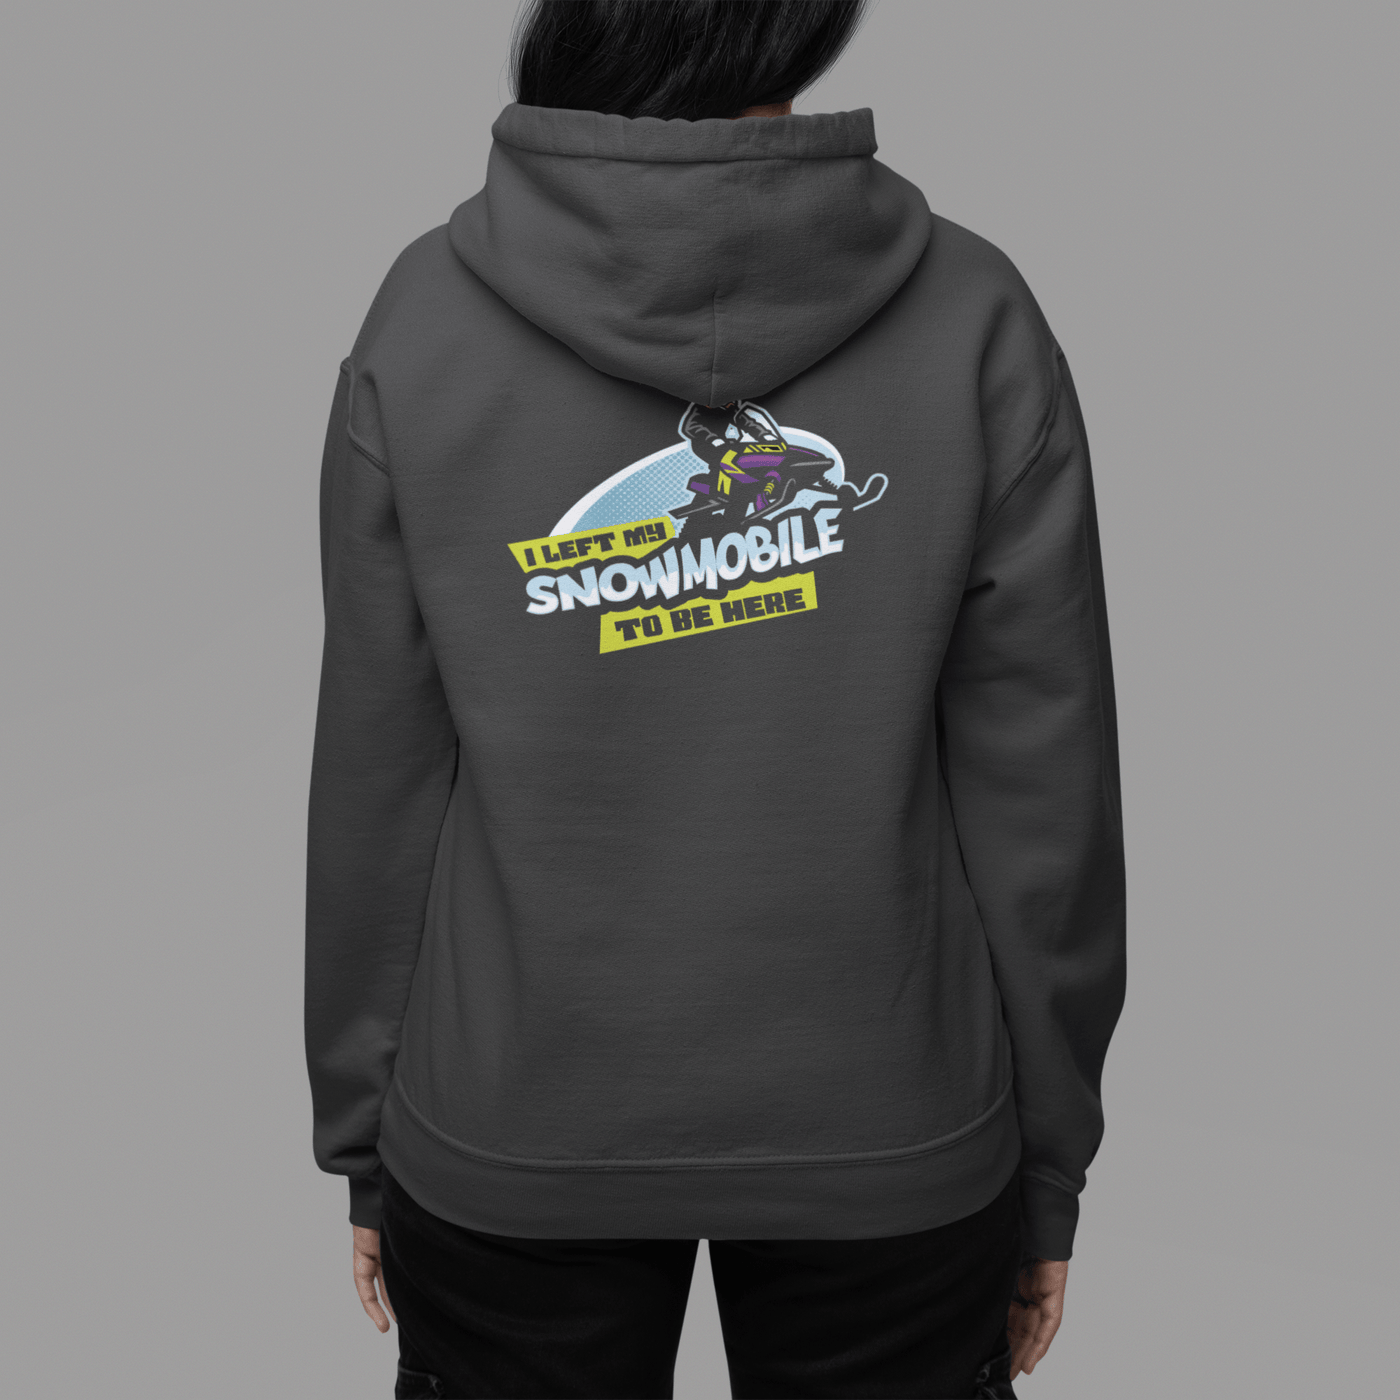 I Left My Snowmobile to be Here Hoodie - Goats Trail Off-Road Apparel Company